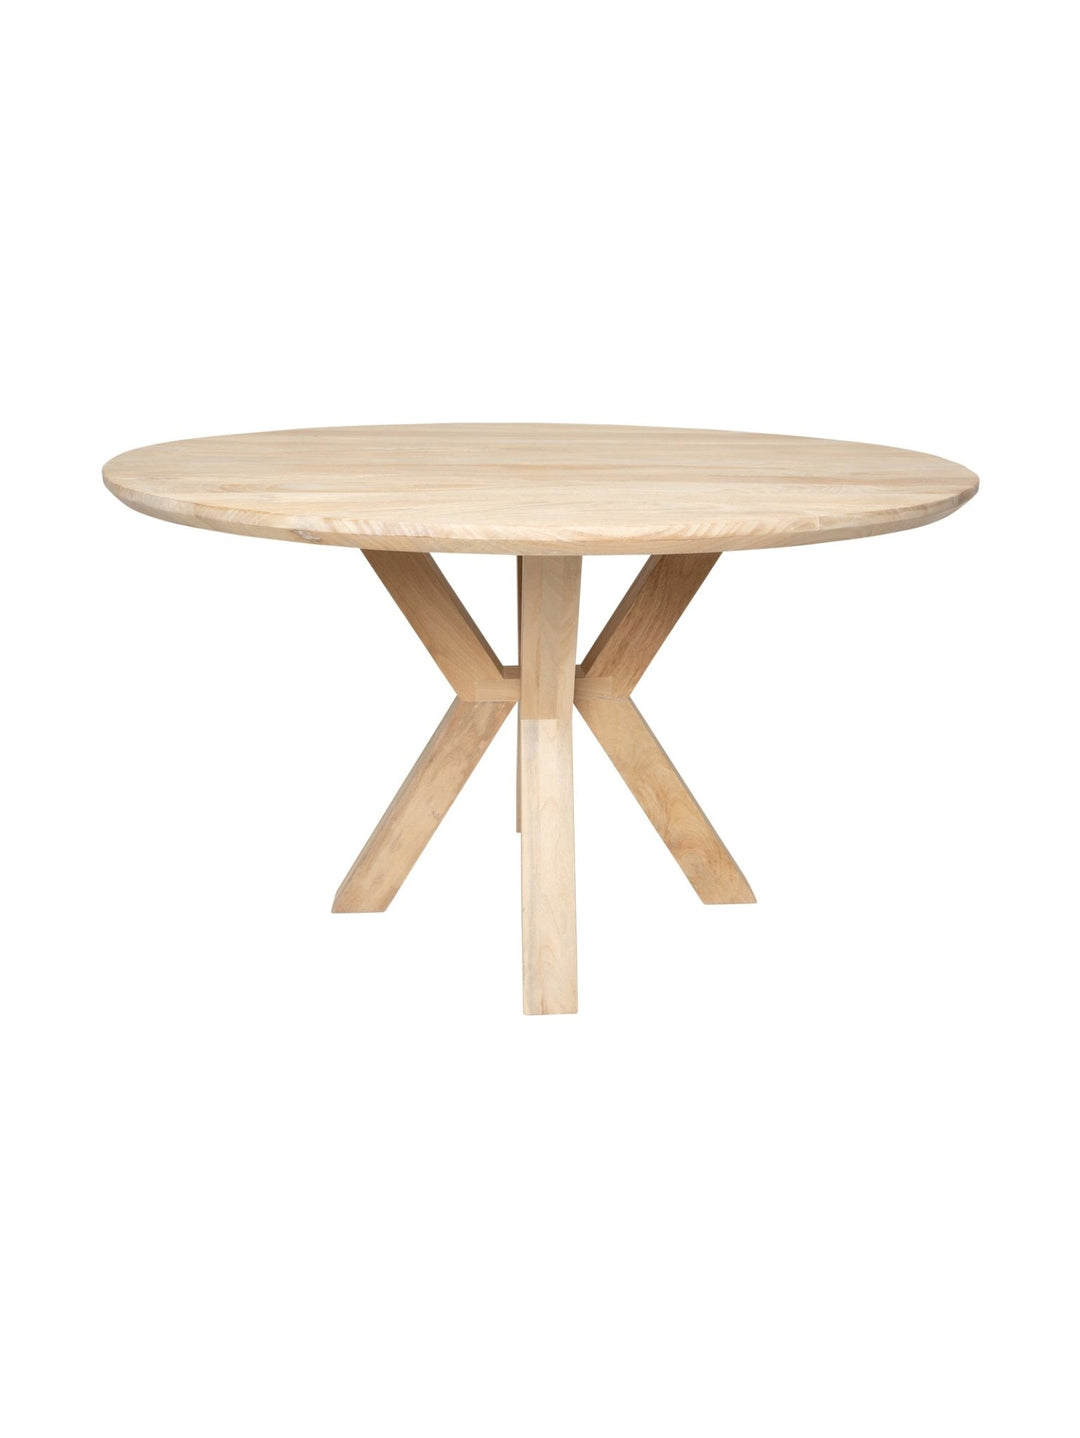 Chic 4 - 6 Seater Round Dining Table - Table - Hertex Haus - Dining Tables